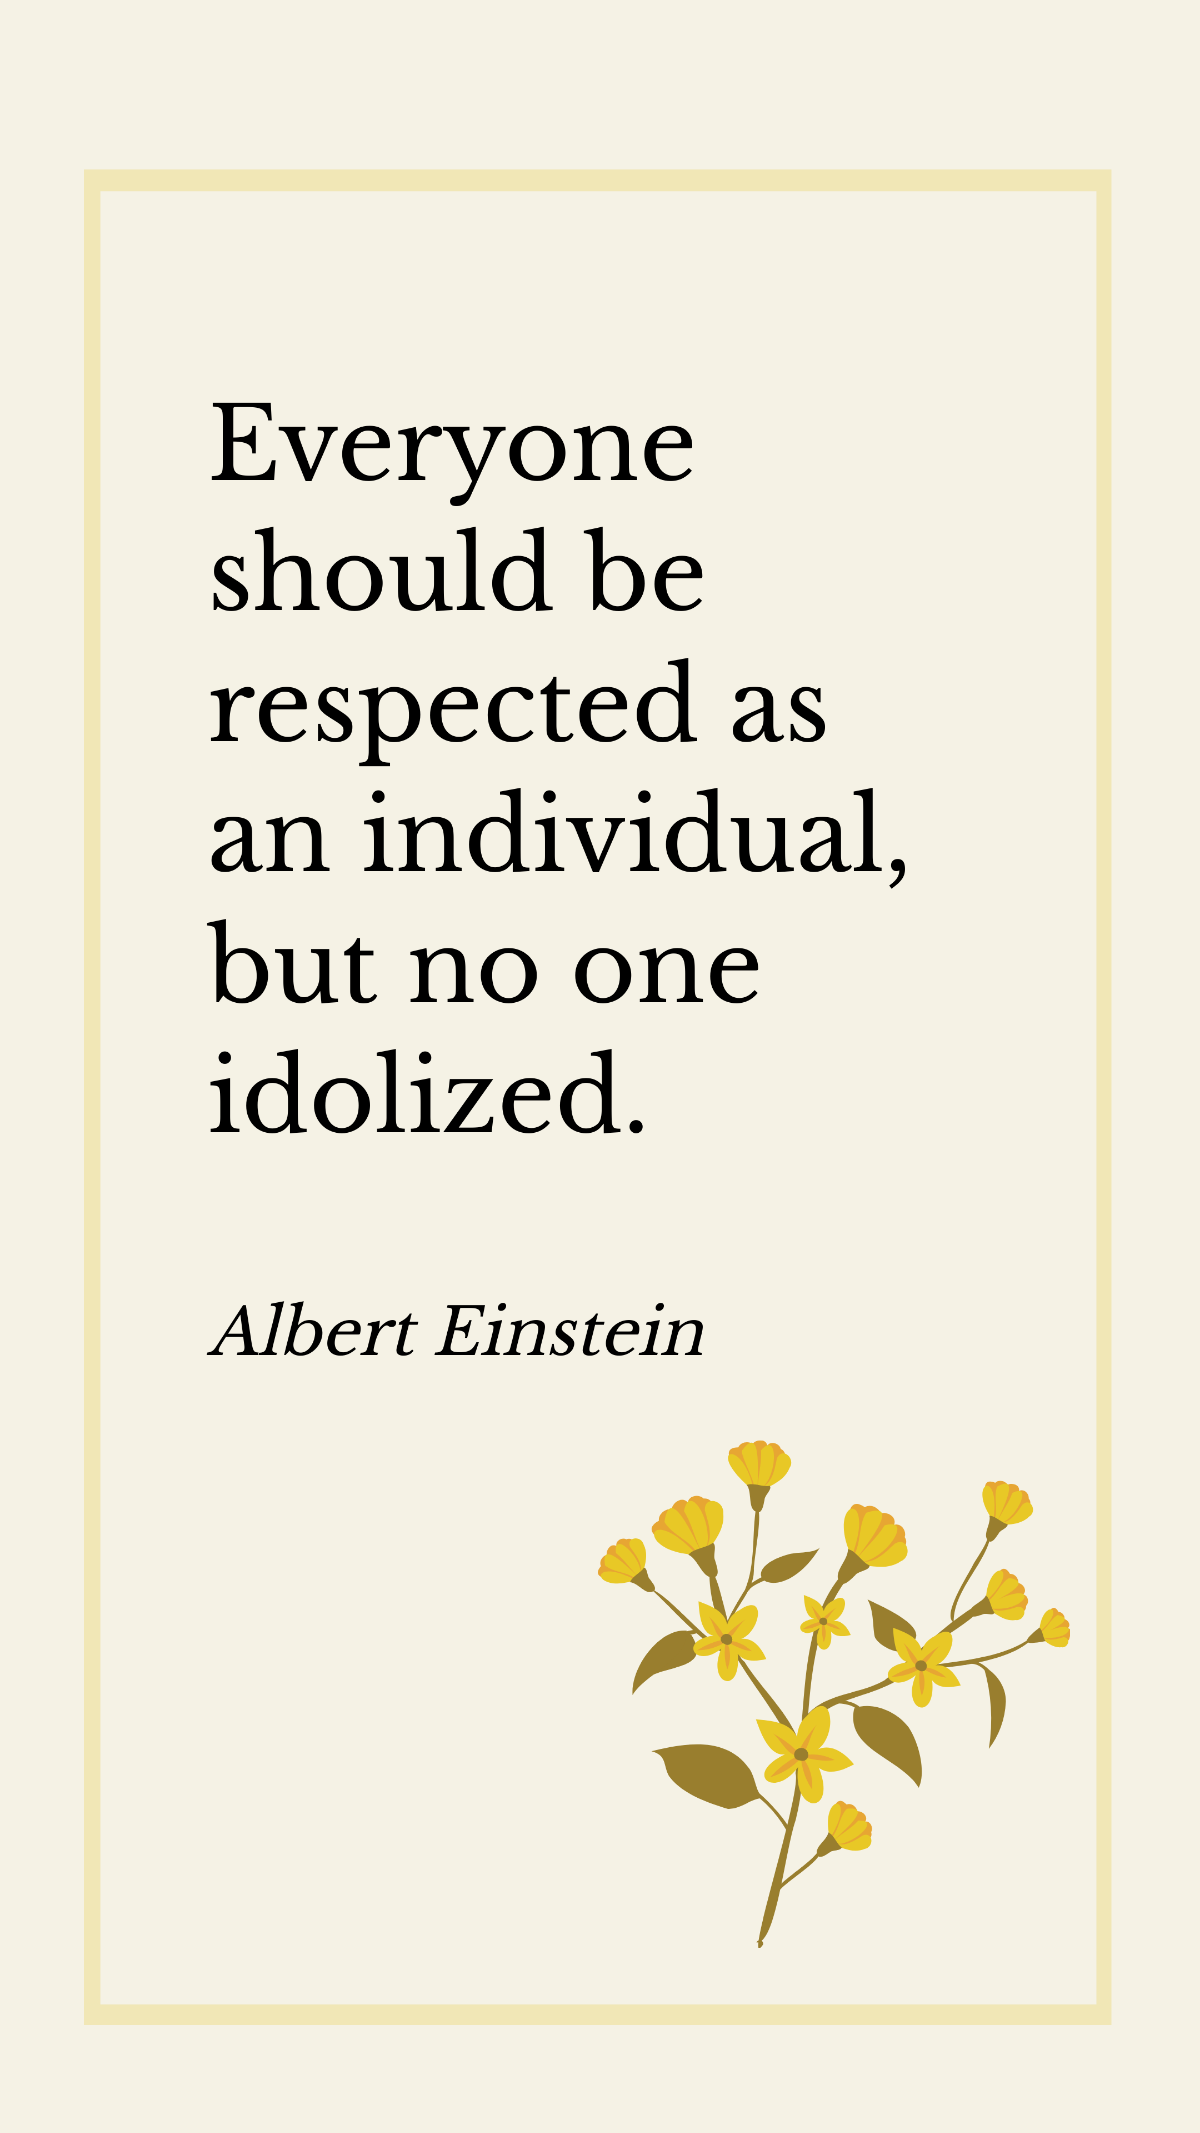 Albert Einstein - Everyone should be respected as an individual, but no one idolized. Template